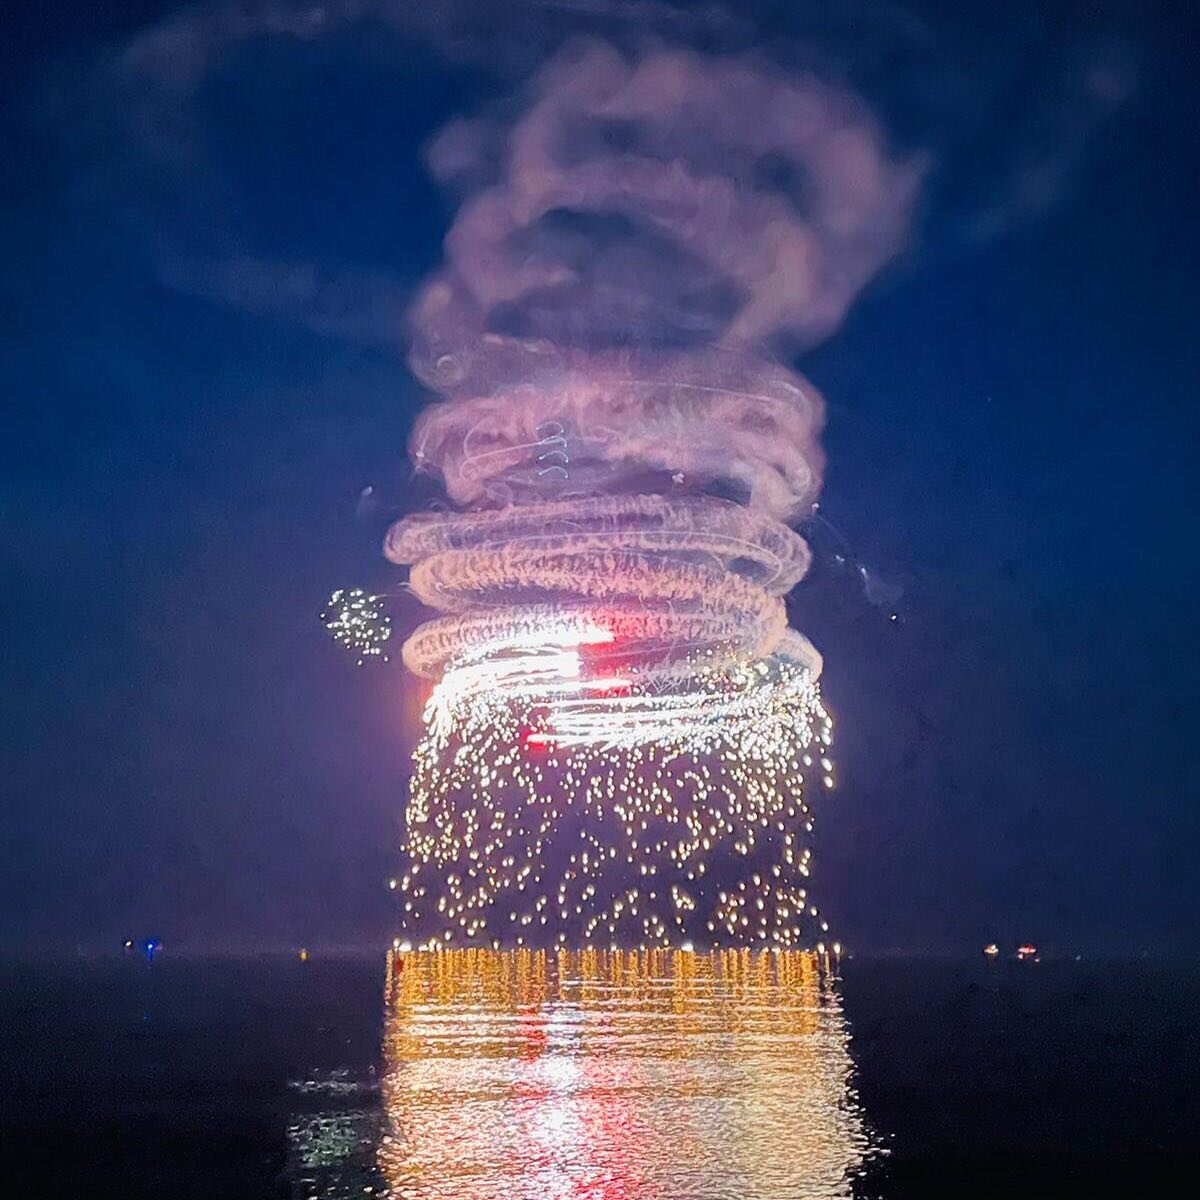 A love picture🔥🔥 
Looking forward to seeing more of your pictures. Please tag us in @aerosparx 

#malaga #torredelmar #events #lighthouses #airdisplay #makingmemories